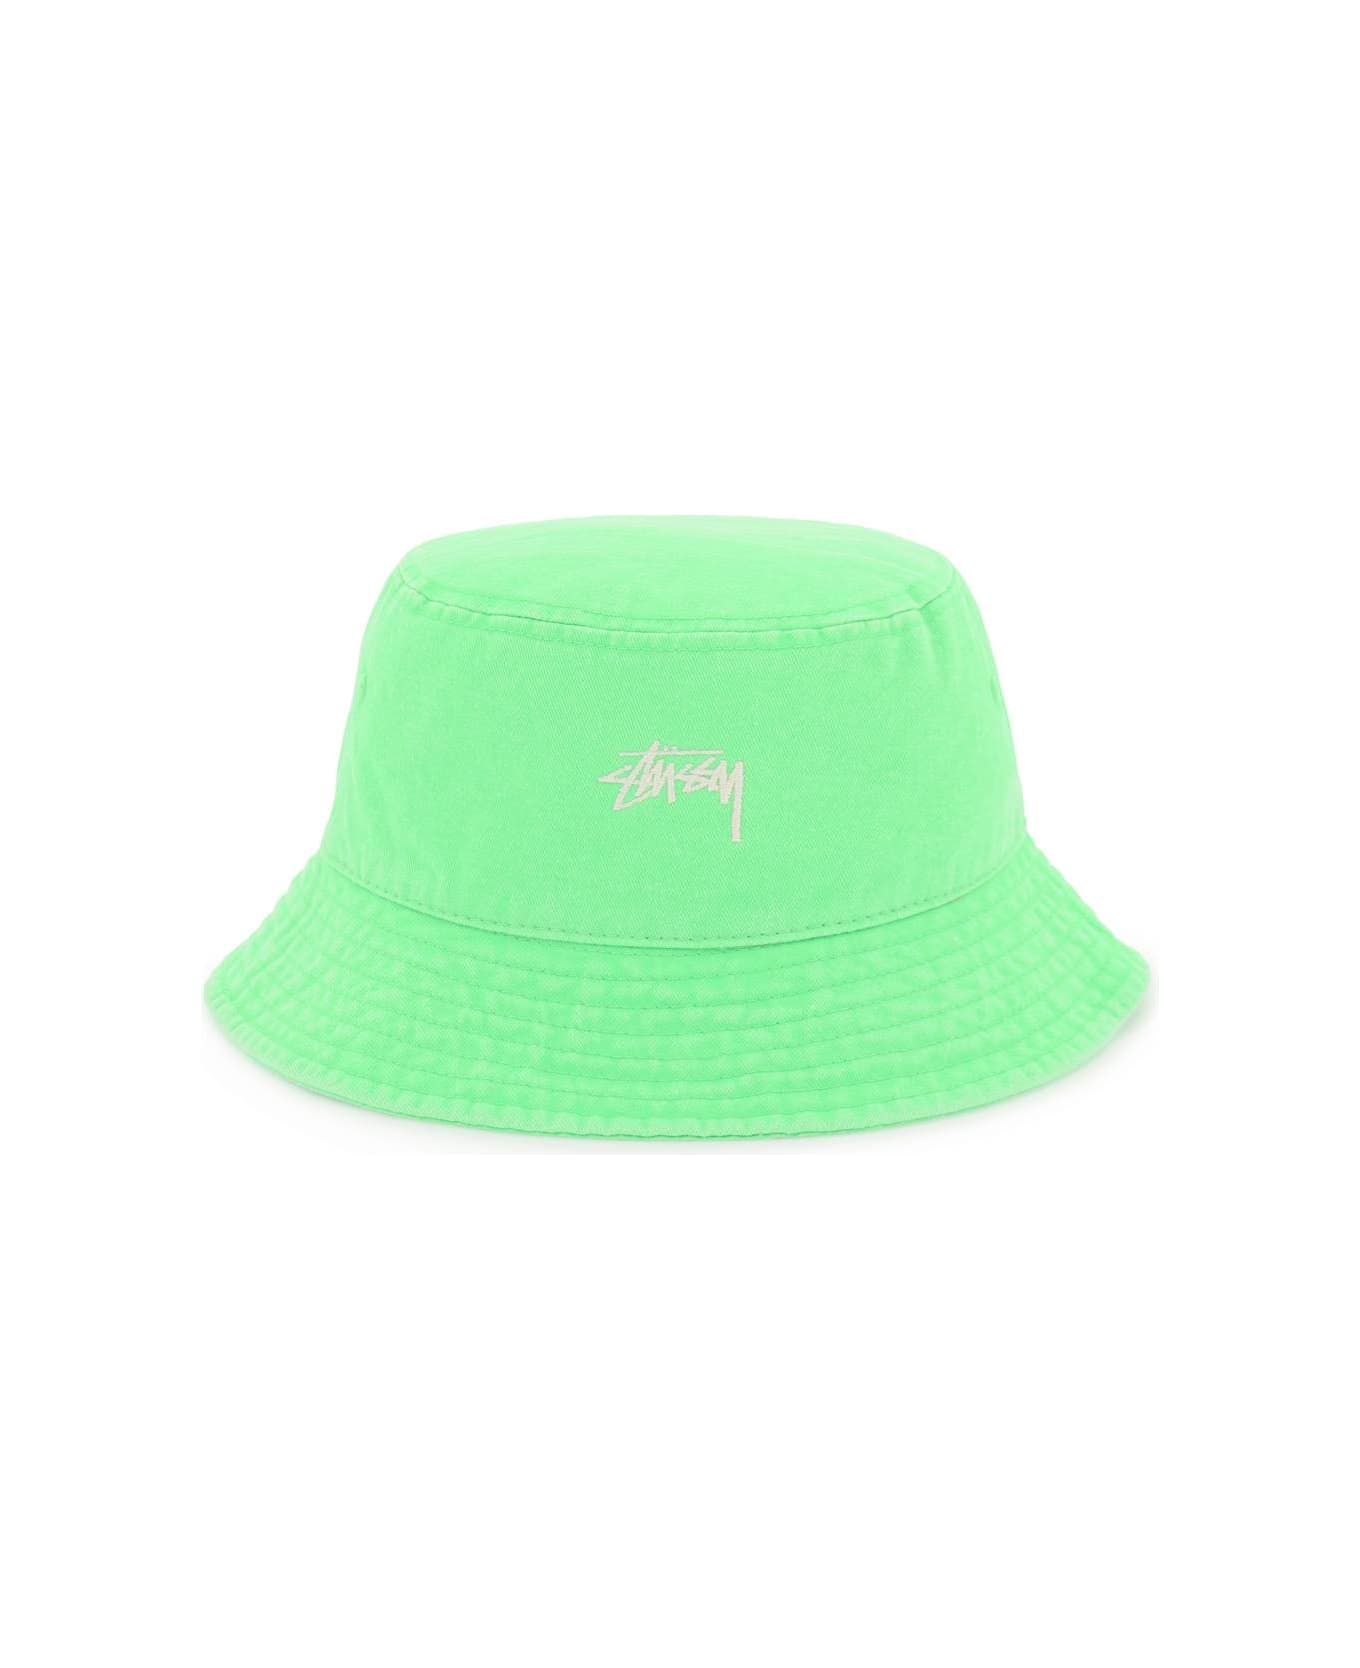 Stussy Washed Stock Bucket Hat - MINT (Green)